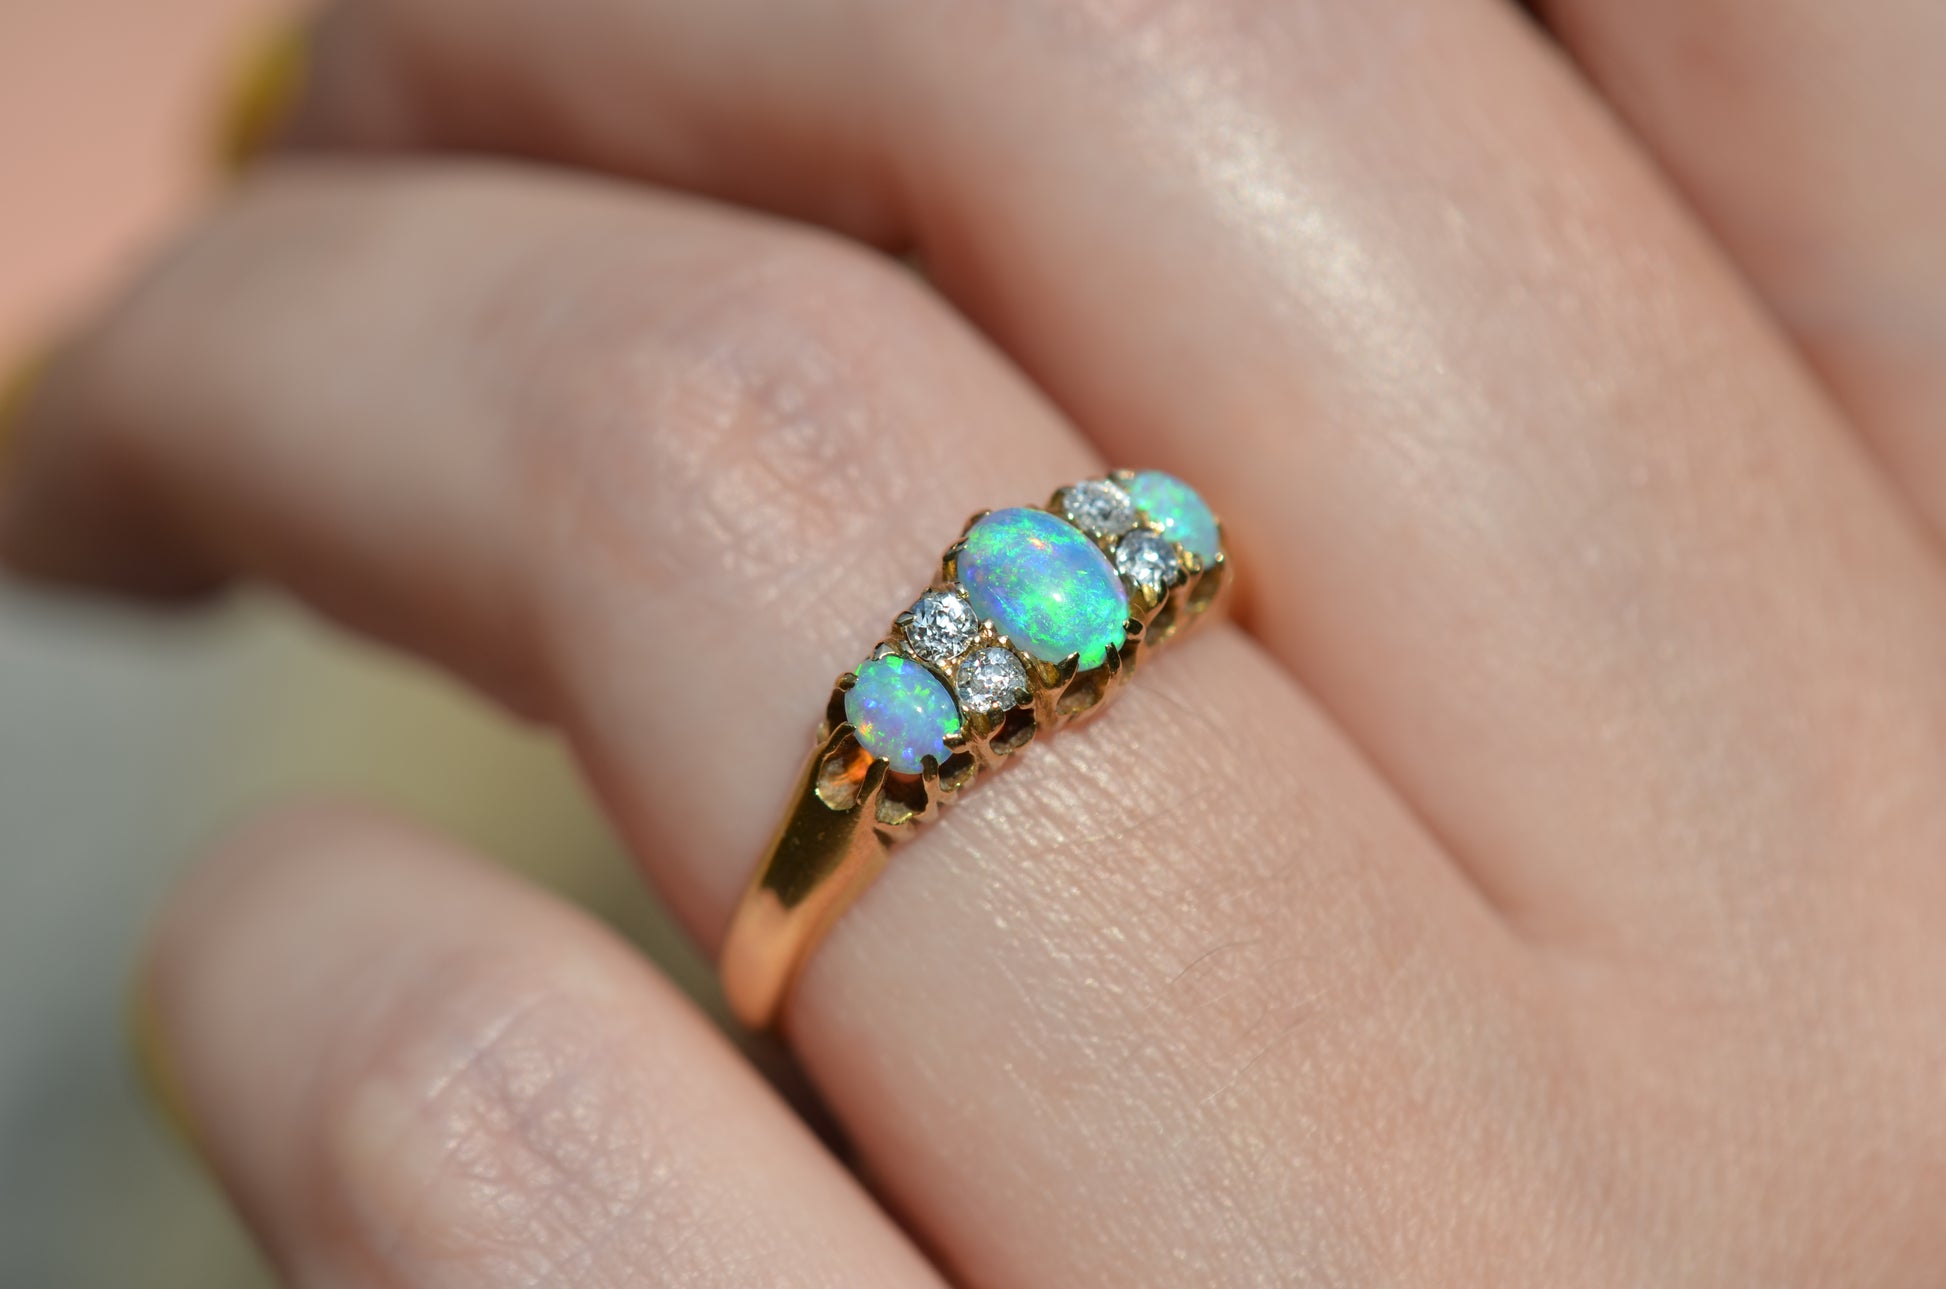 A very tightly cropped macro of the ring on a Caucasian model, showing the scale to the ring on the hand as well as the play of color of the opals in direct sunlight.